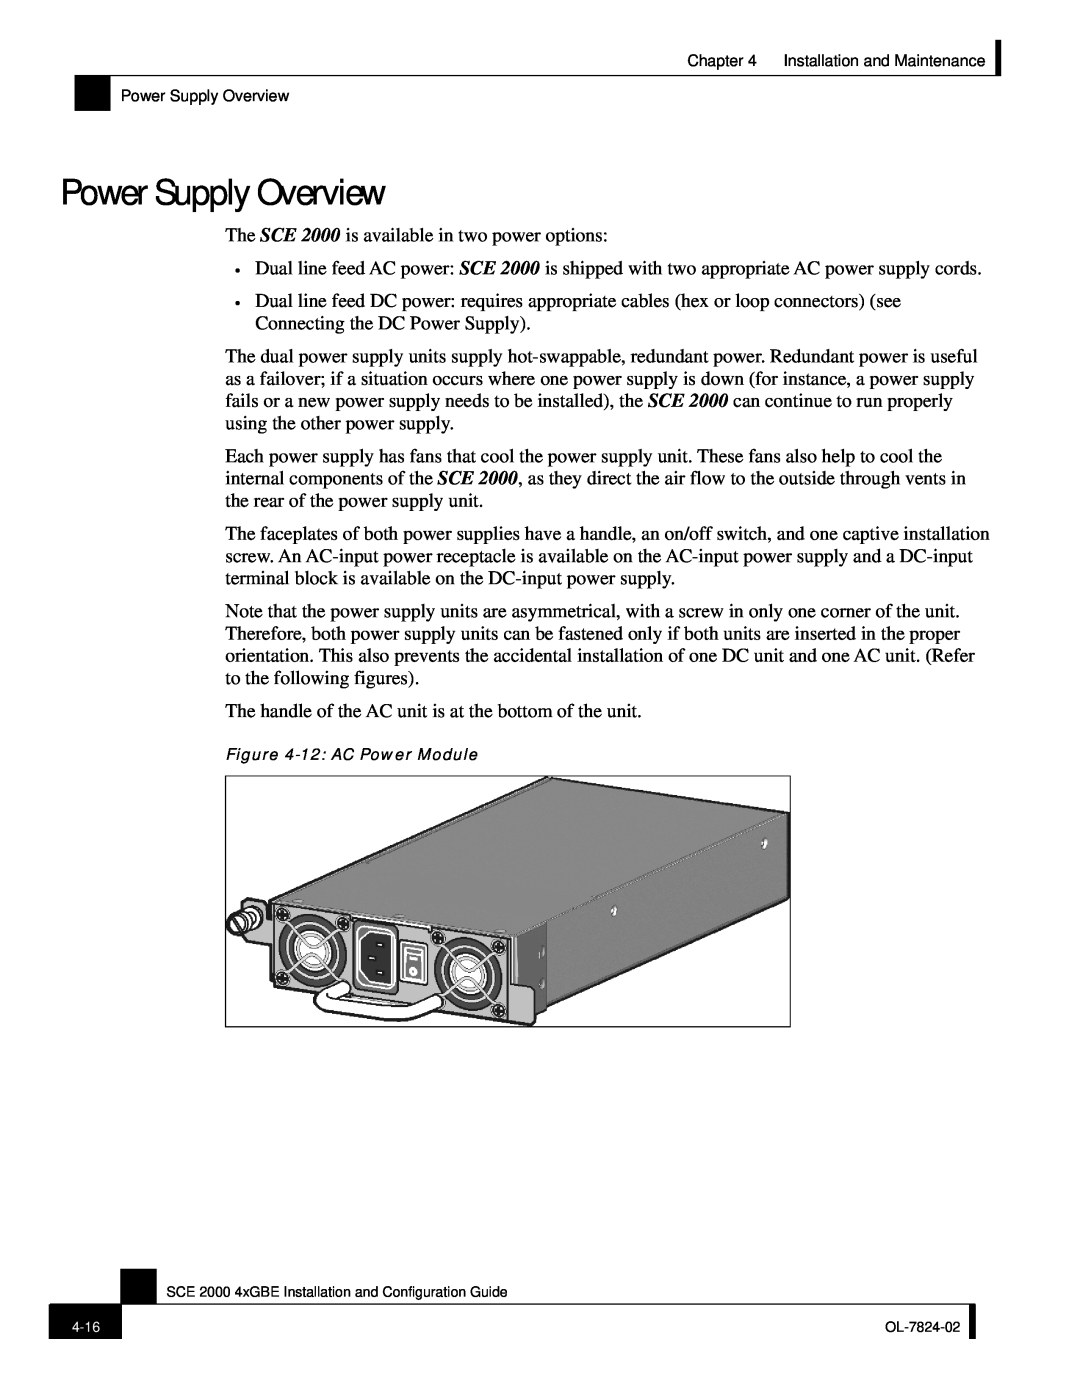 Cisco Systems SCE 2000 4xGBE manual Power Supply Overview 